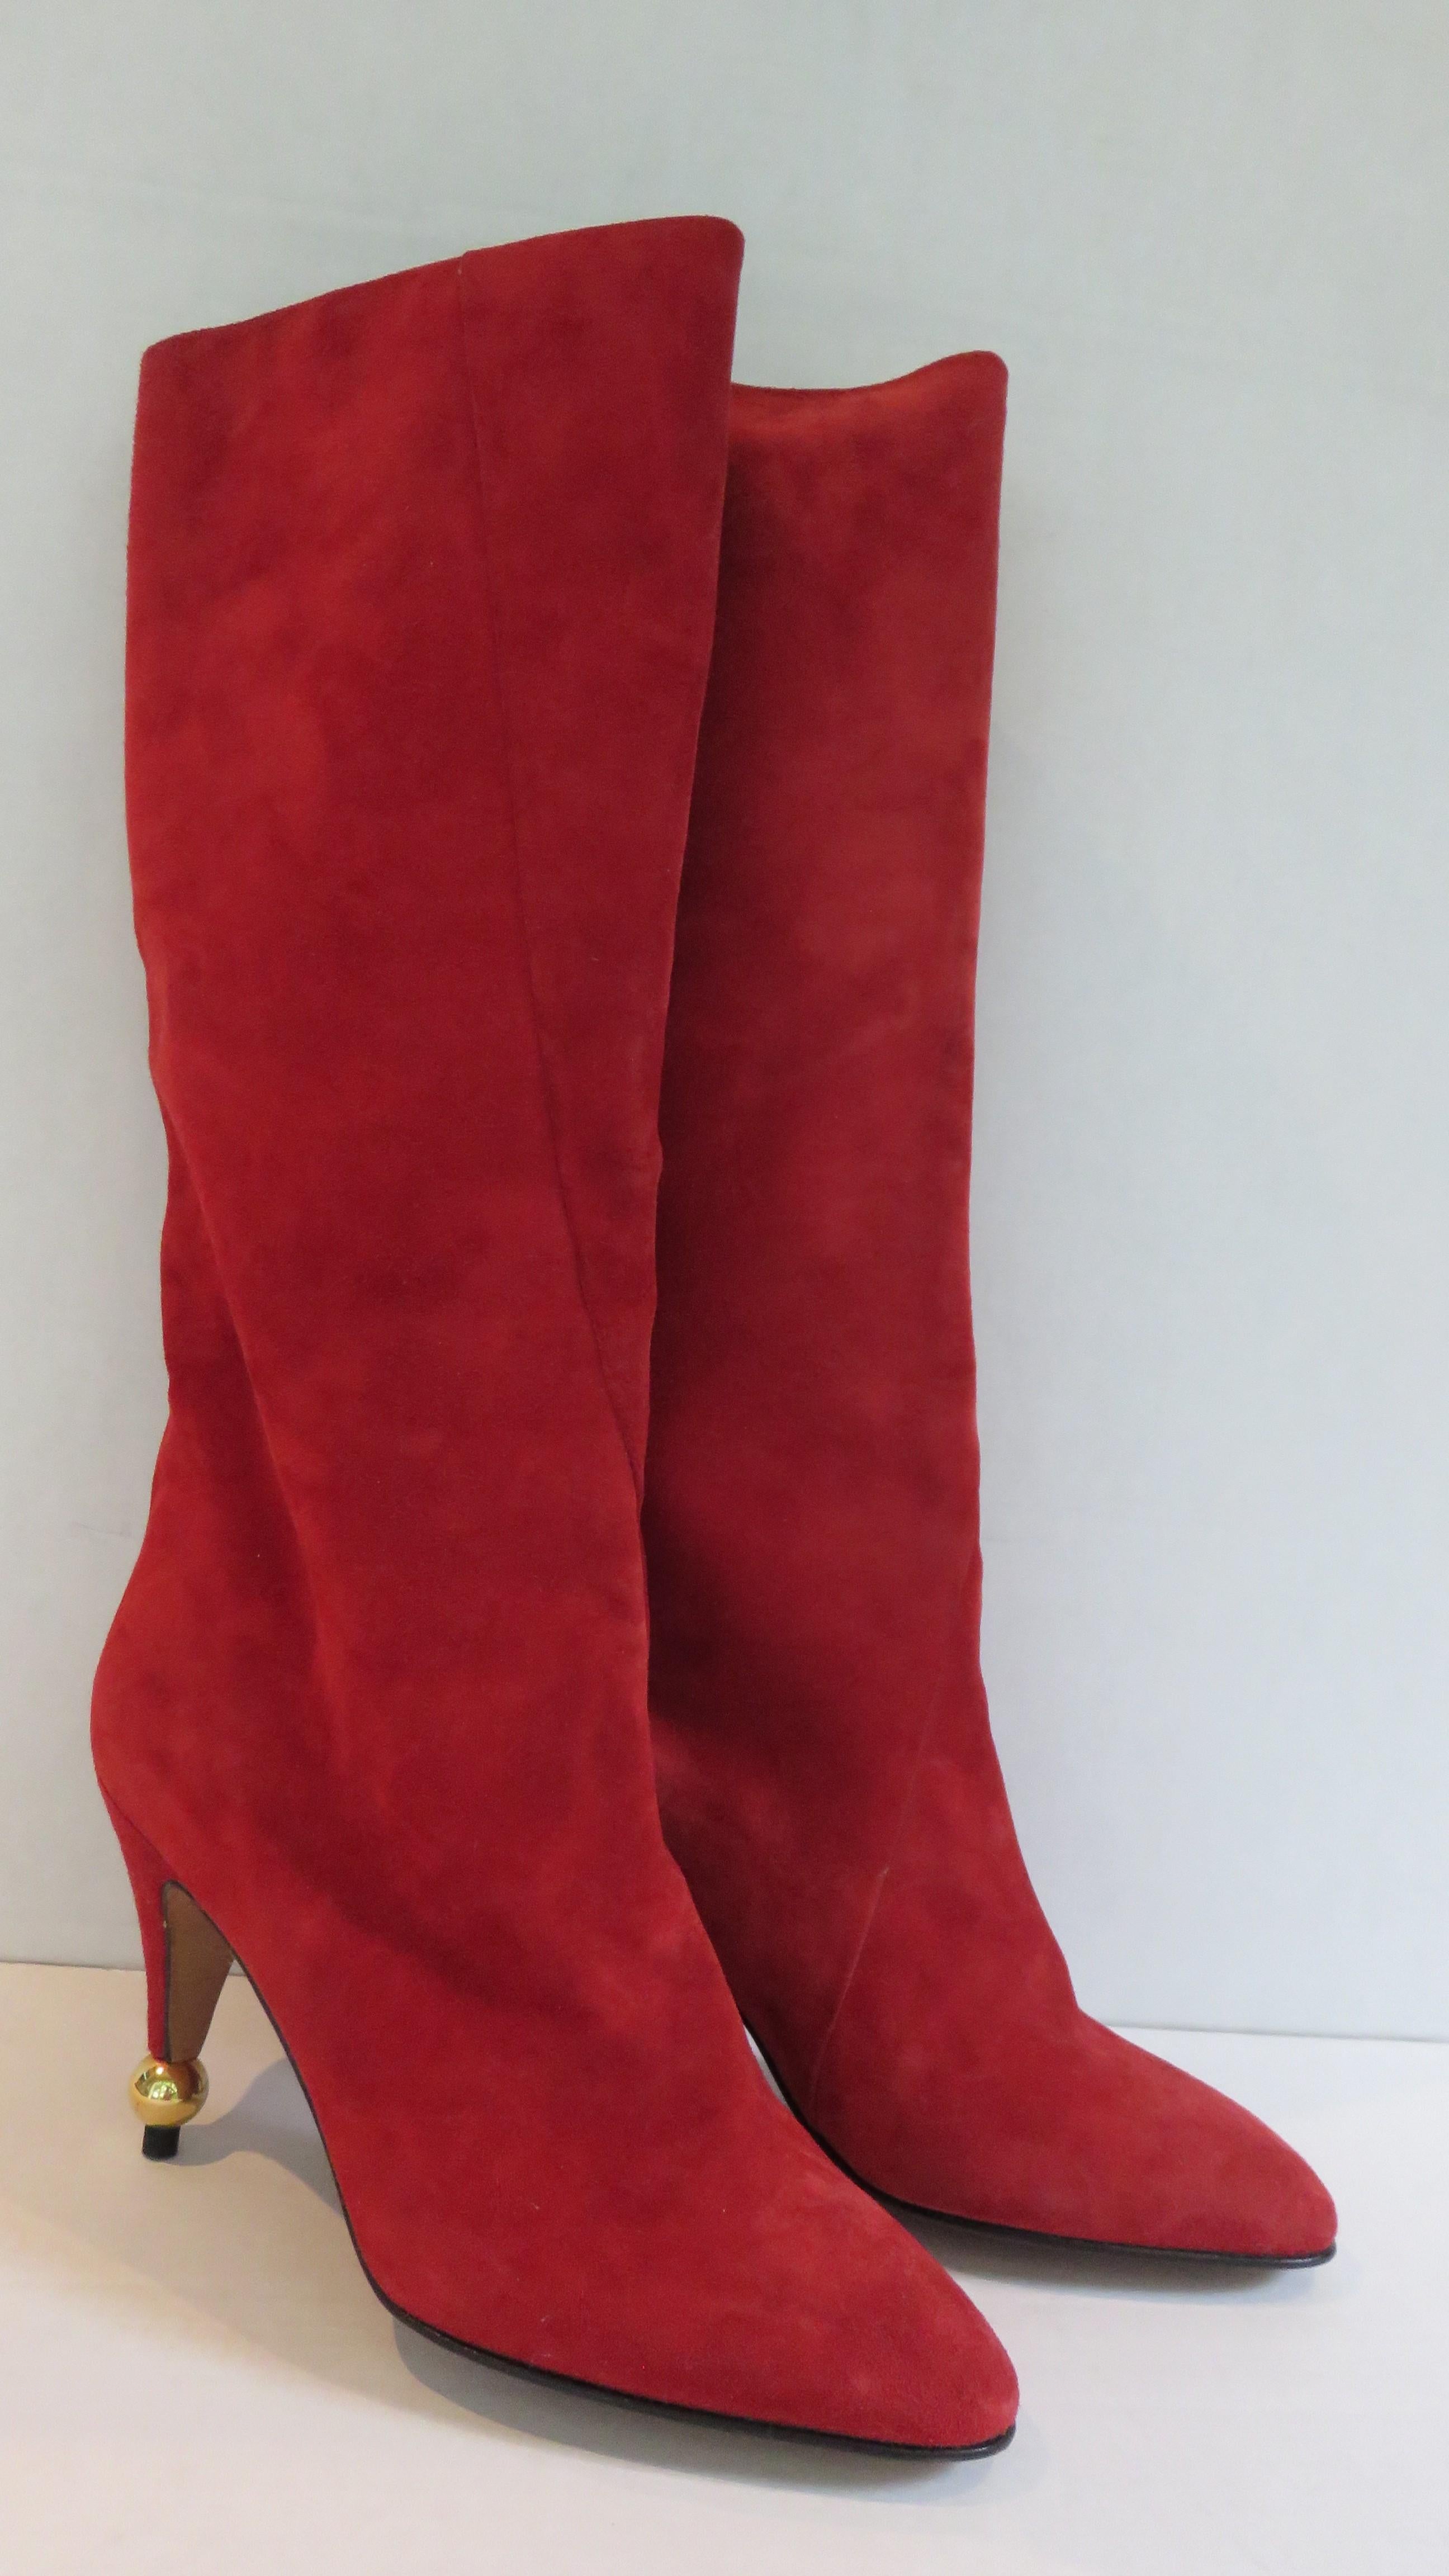 Roger Vivier New Vintage 1980s Suede Ball Heel Boots Size 8 In Excellent Condition For Sale In Water Mill, NY